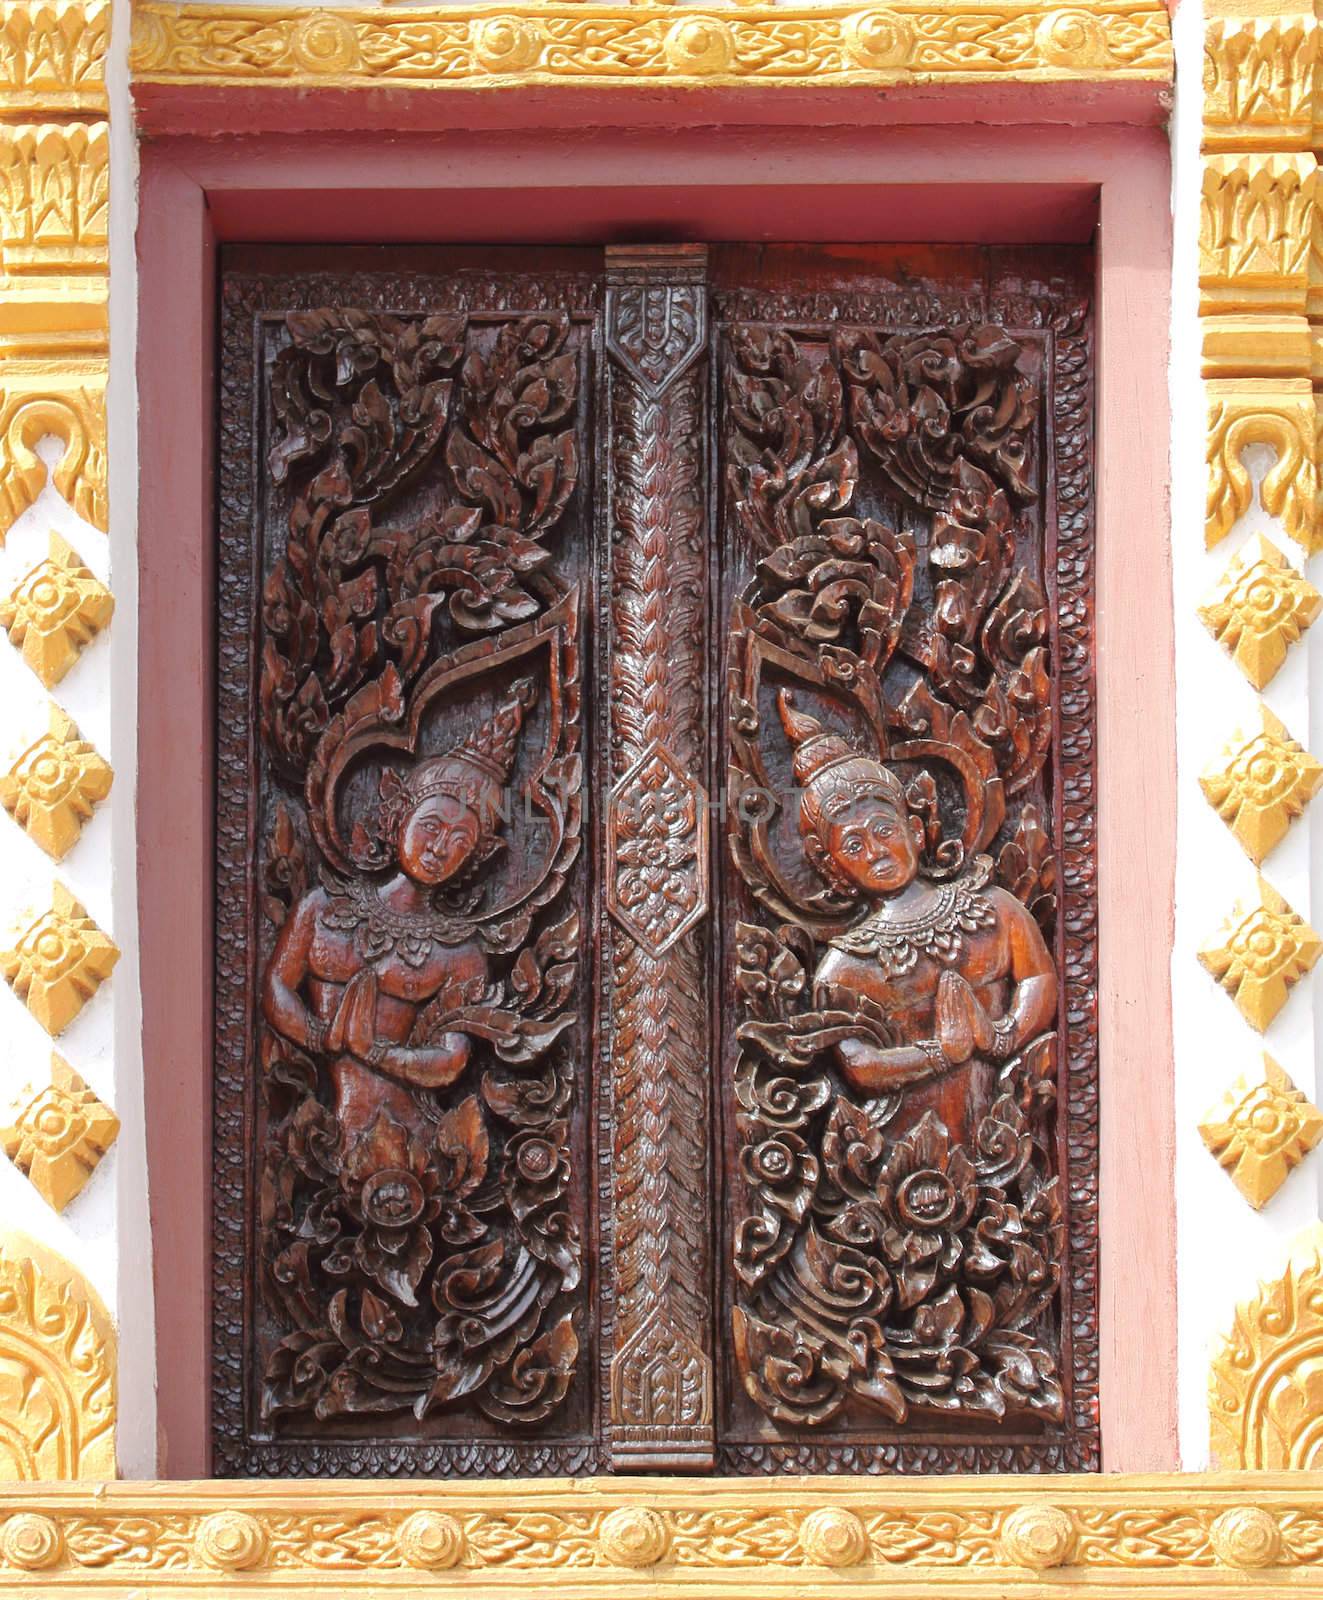 Delicate and elaborated detailed of the Buddhist monastery window, Laos